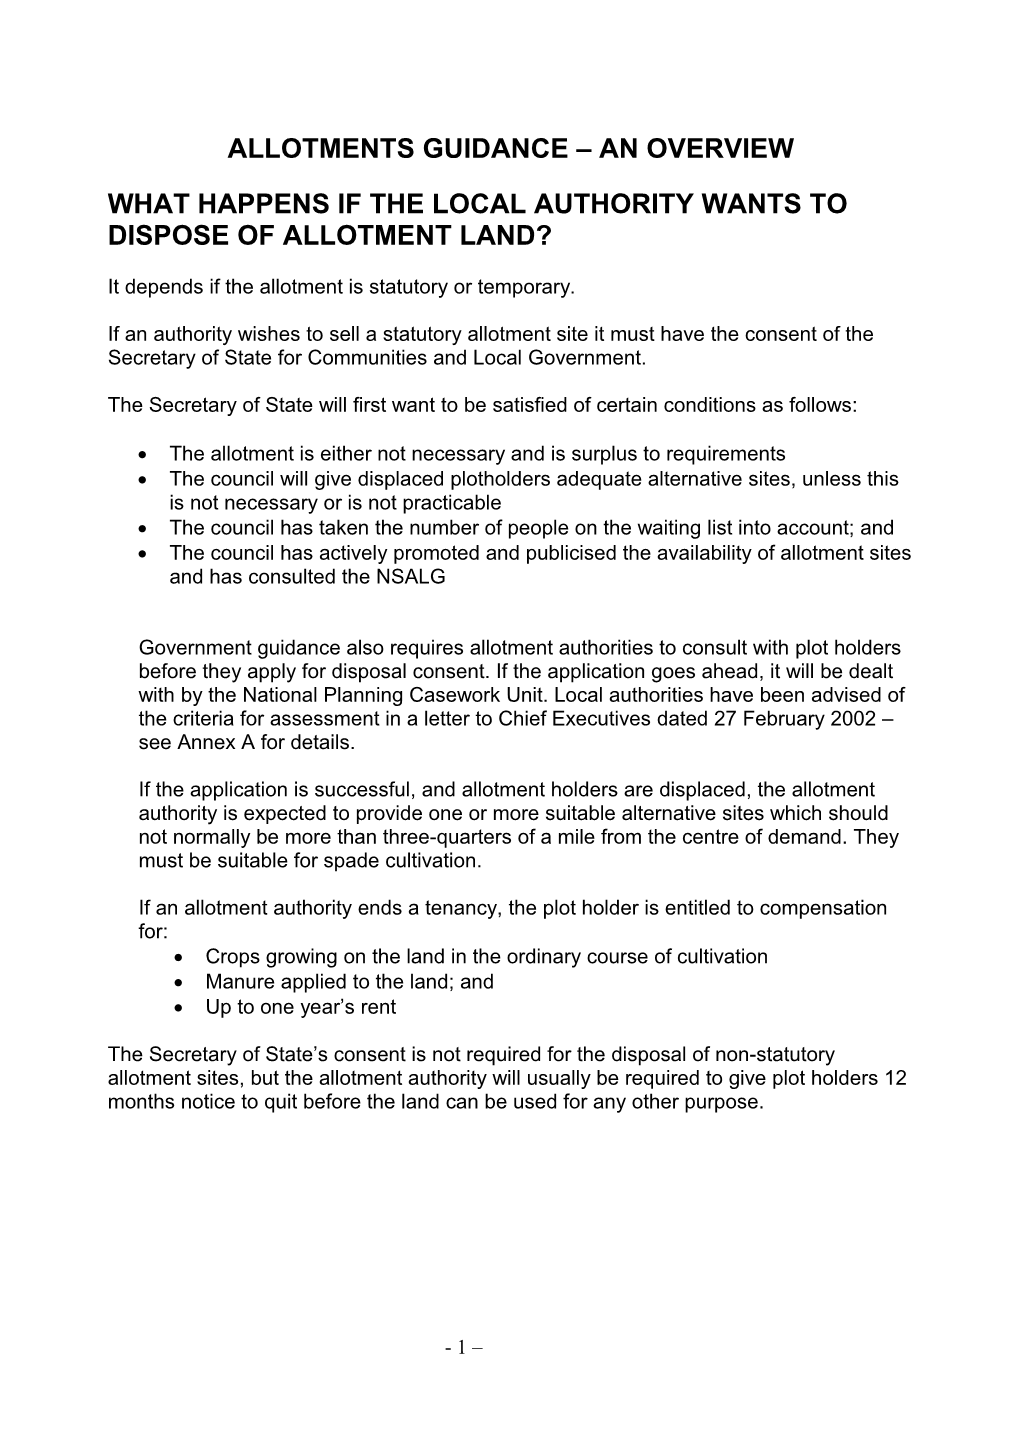 Guidance on Allotment Policy and Casework